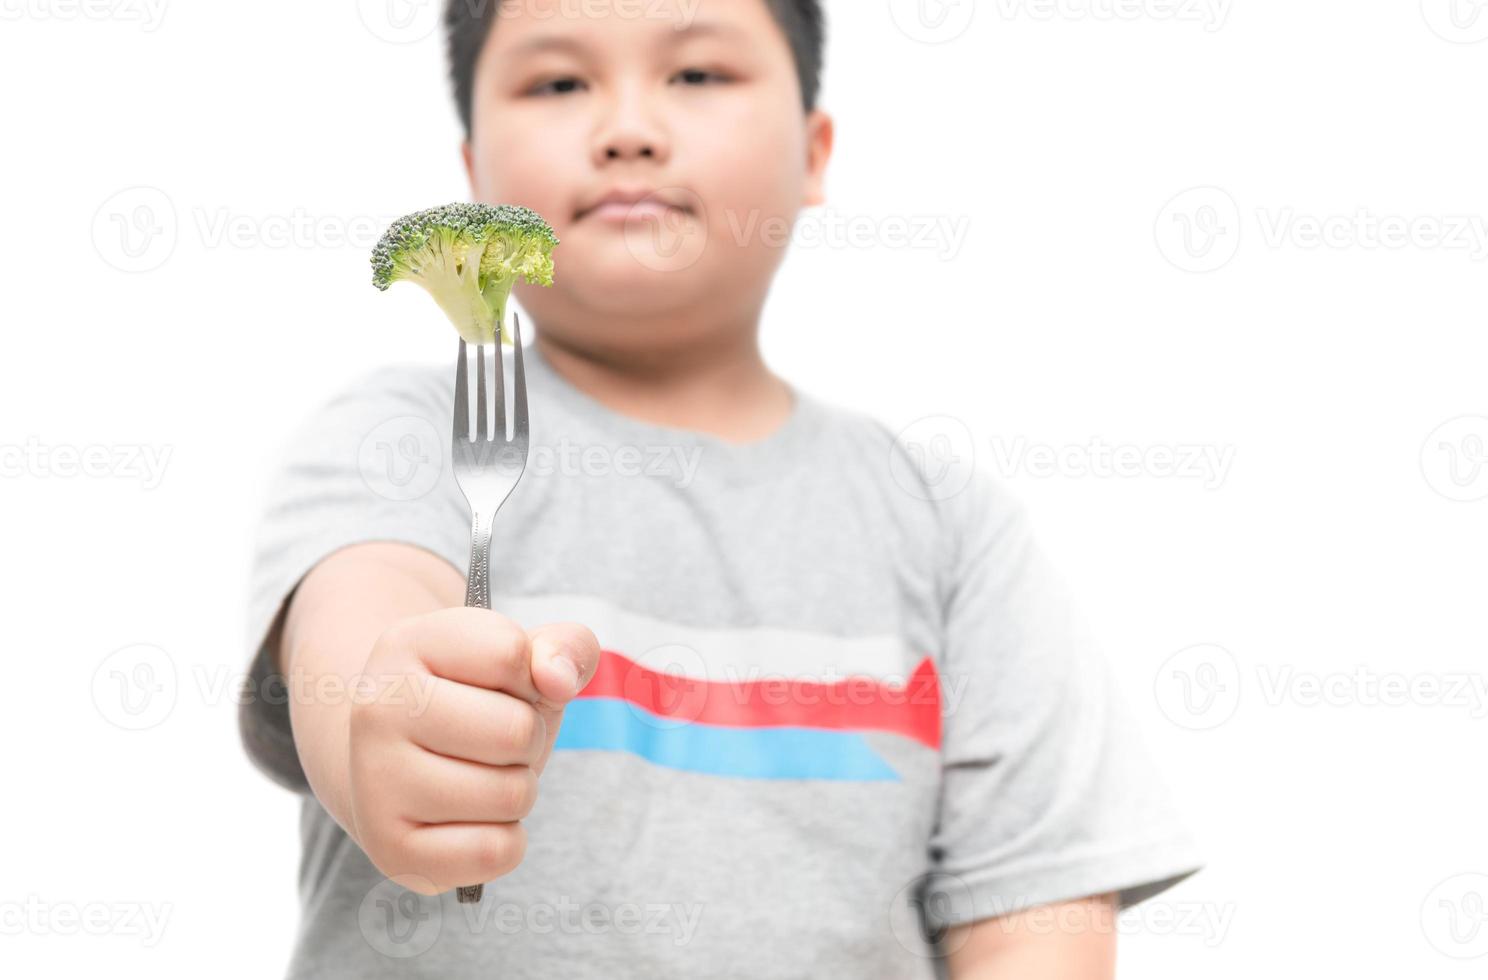 broccoli on hand obese fat boy isolated photo